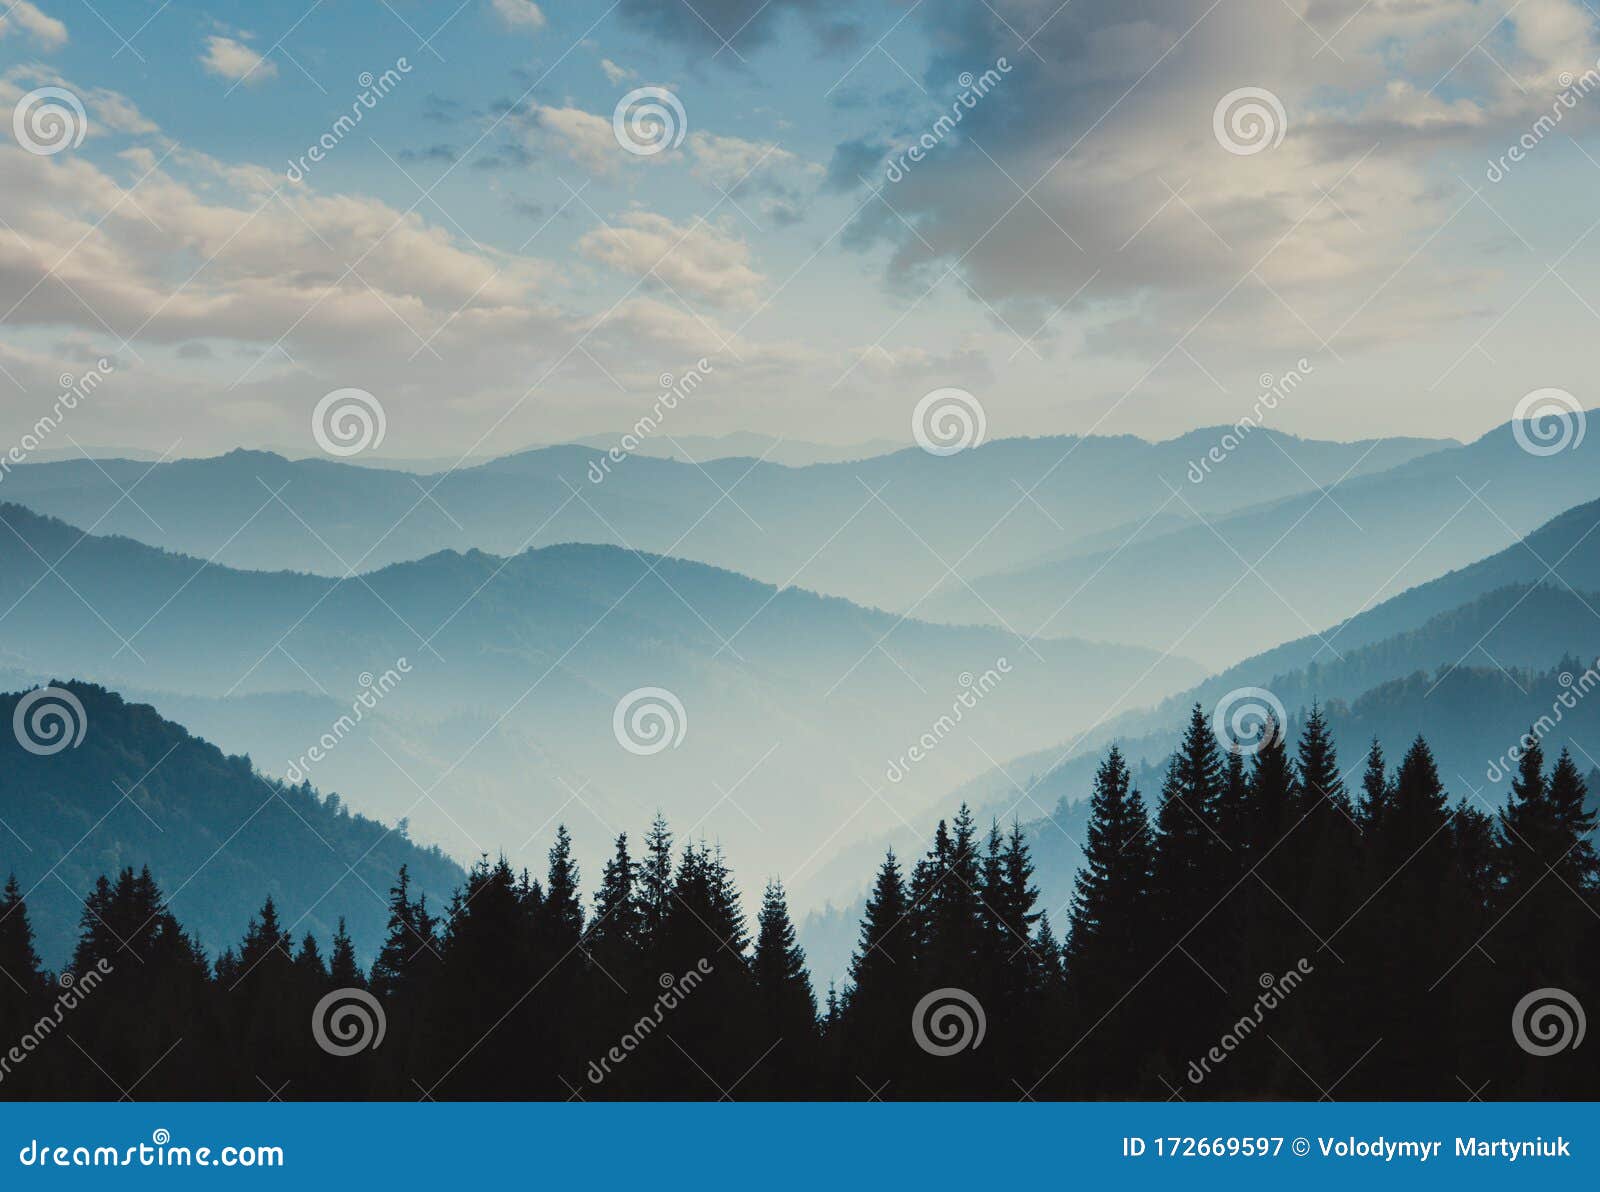 landscape of misty mountains. view of coniferous forest, layers of mountain and haze in the hills at distance. beautiful cloudy sk